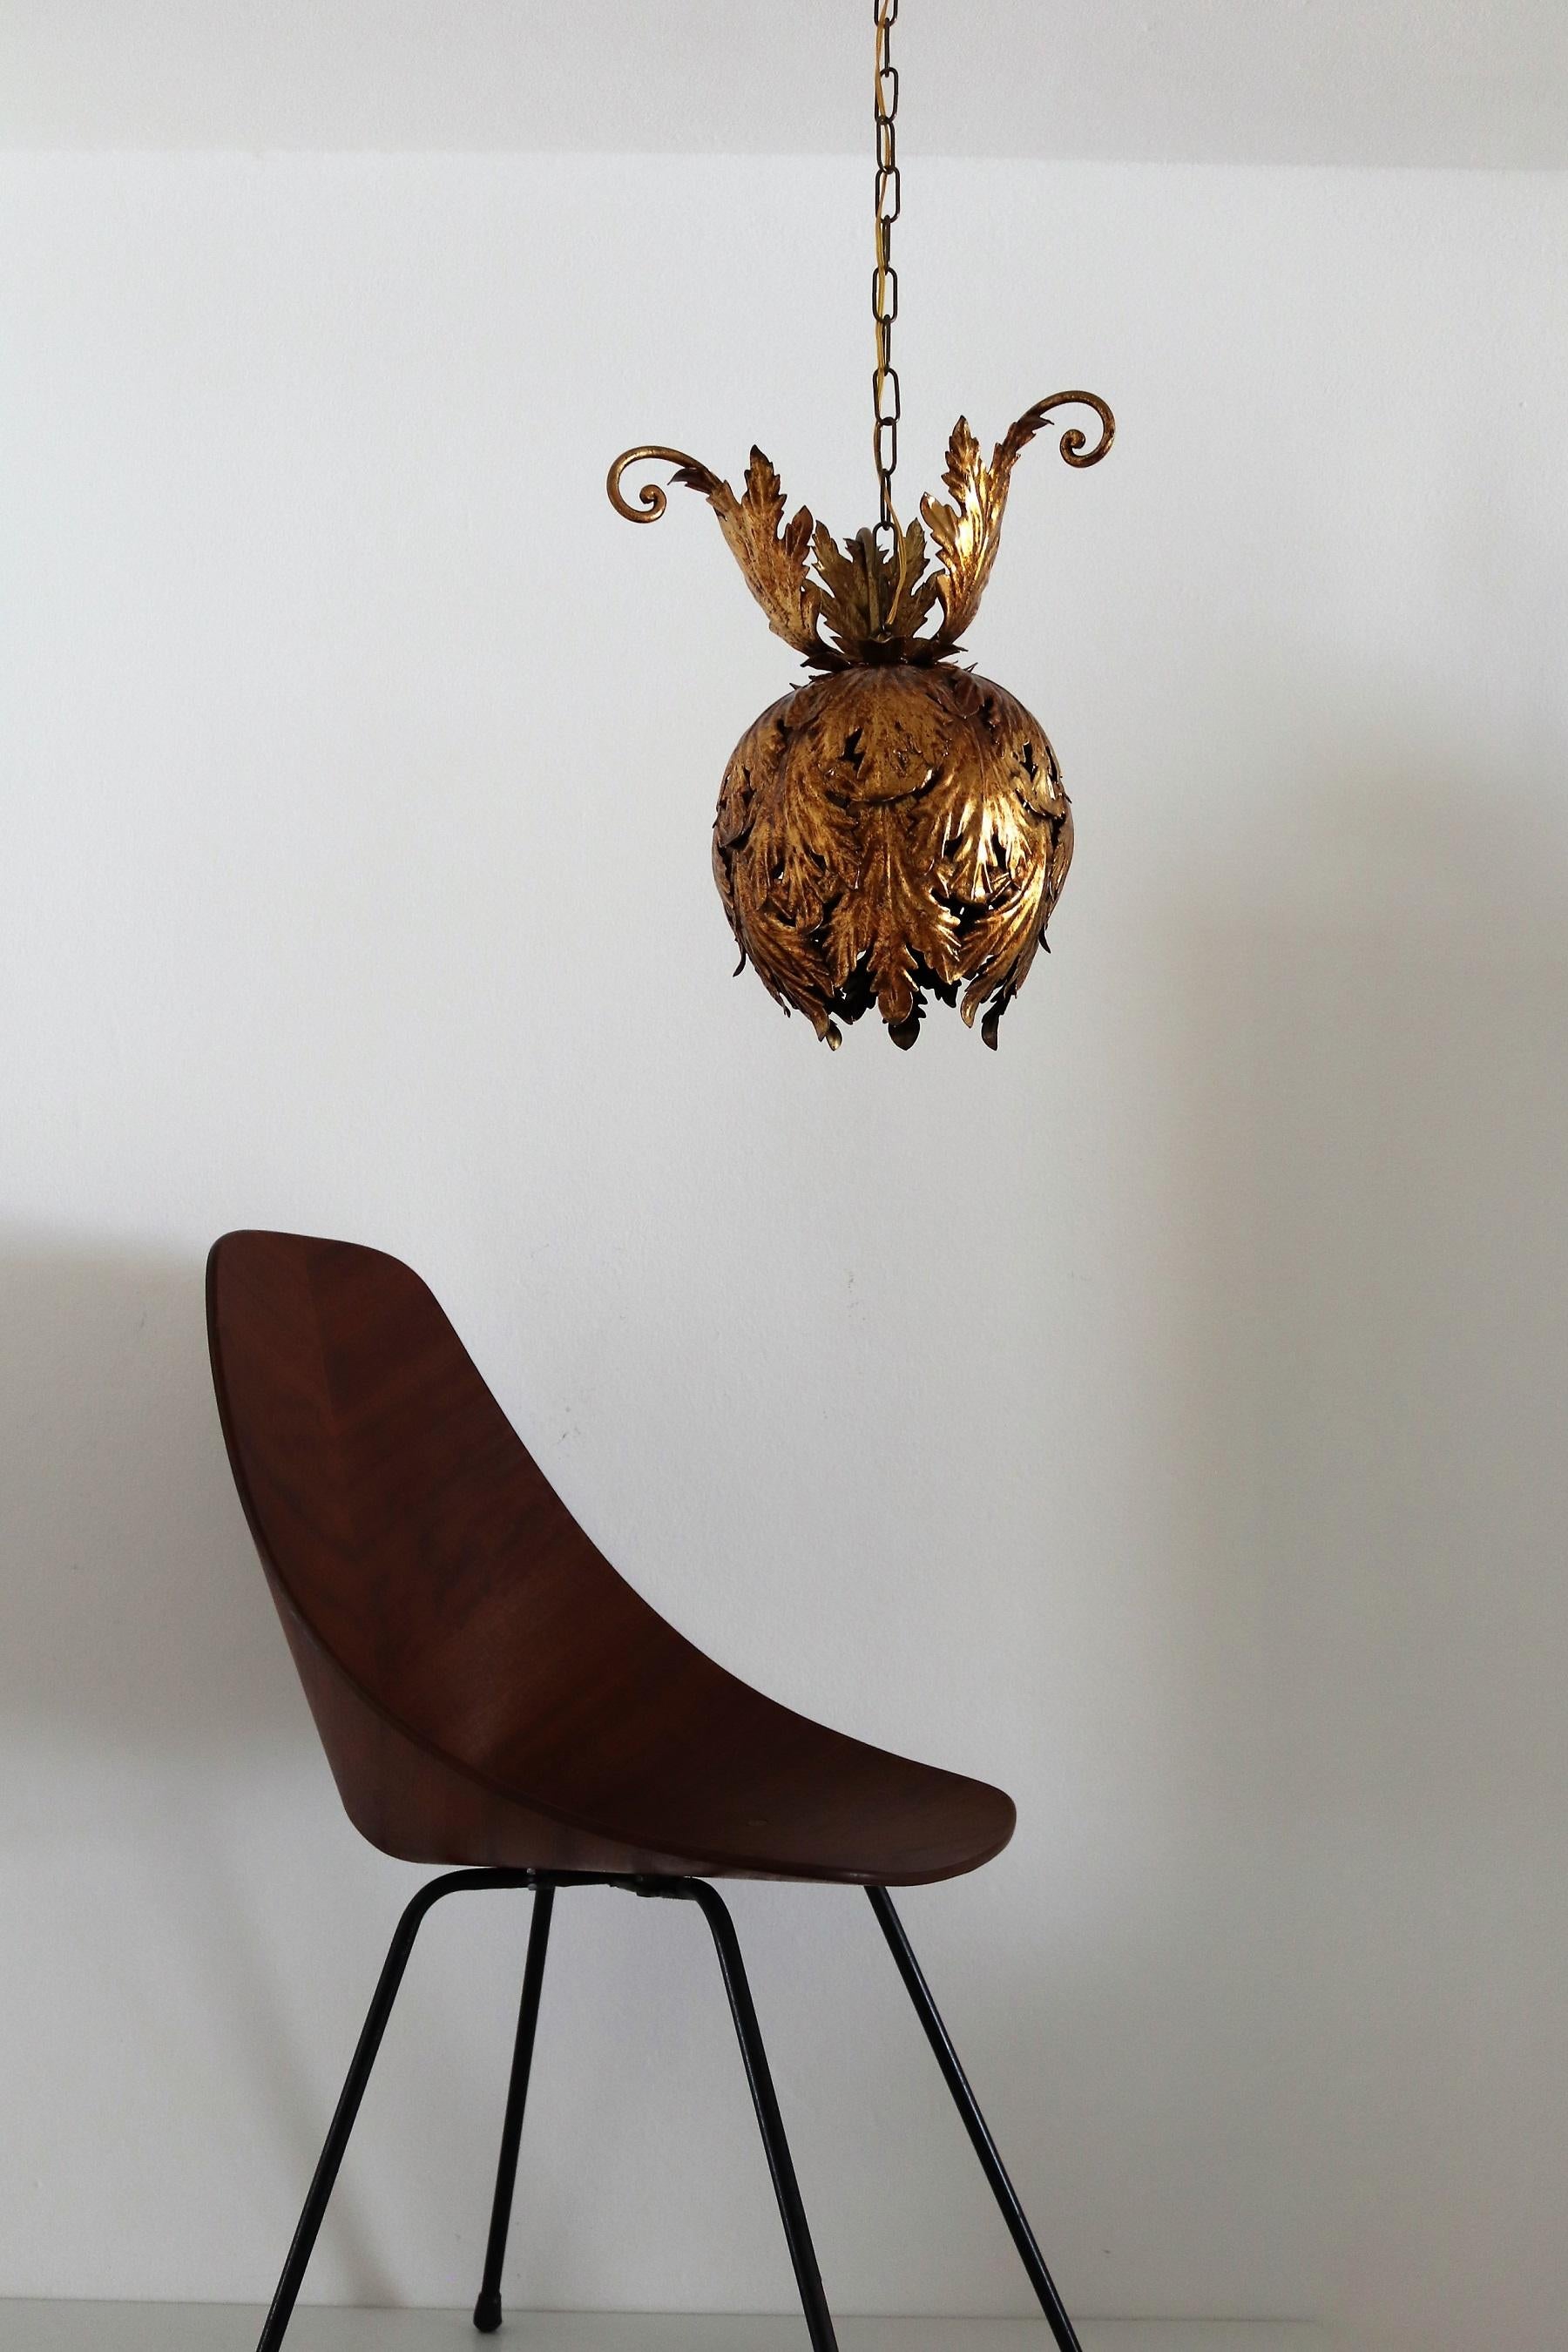 Italian Midcentury Gilt Metal Pendant Lamp with Leaves for Hans Kögl, 1960s For Sale 10